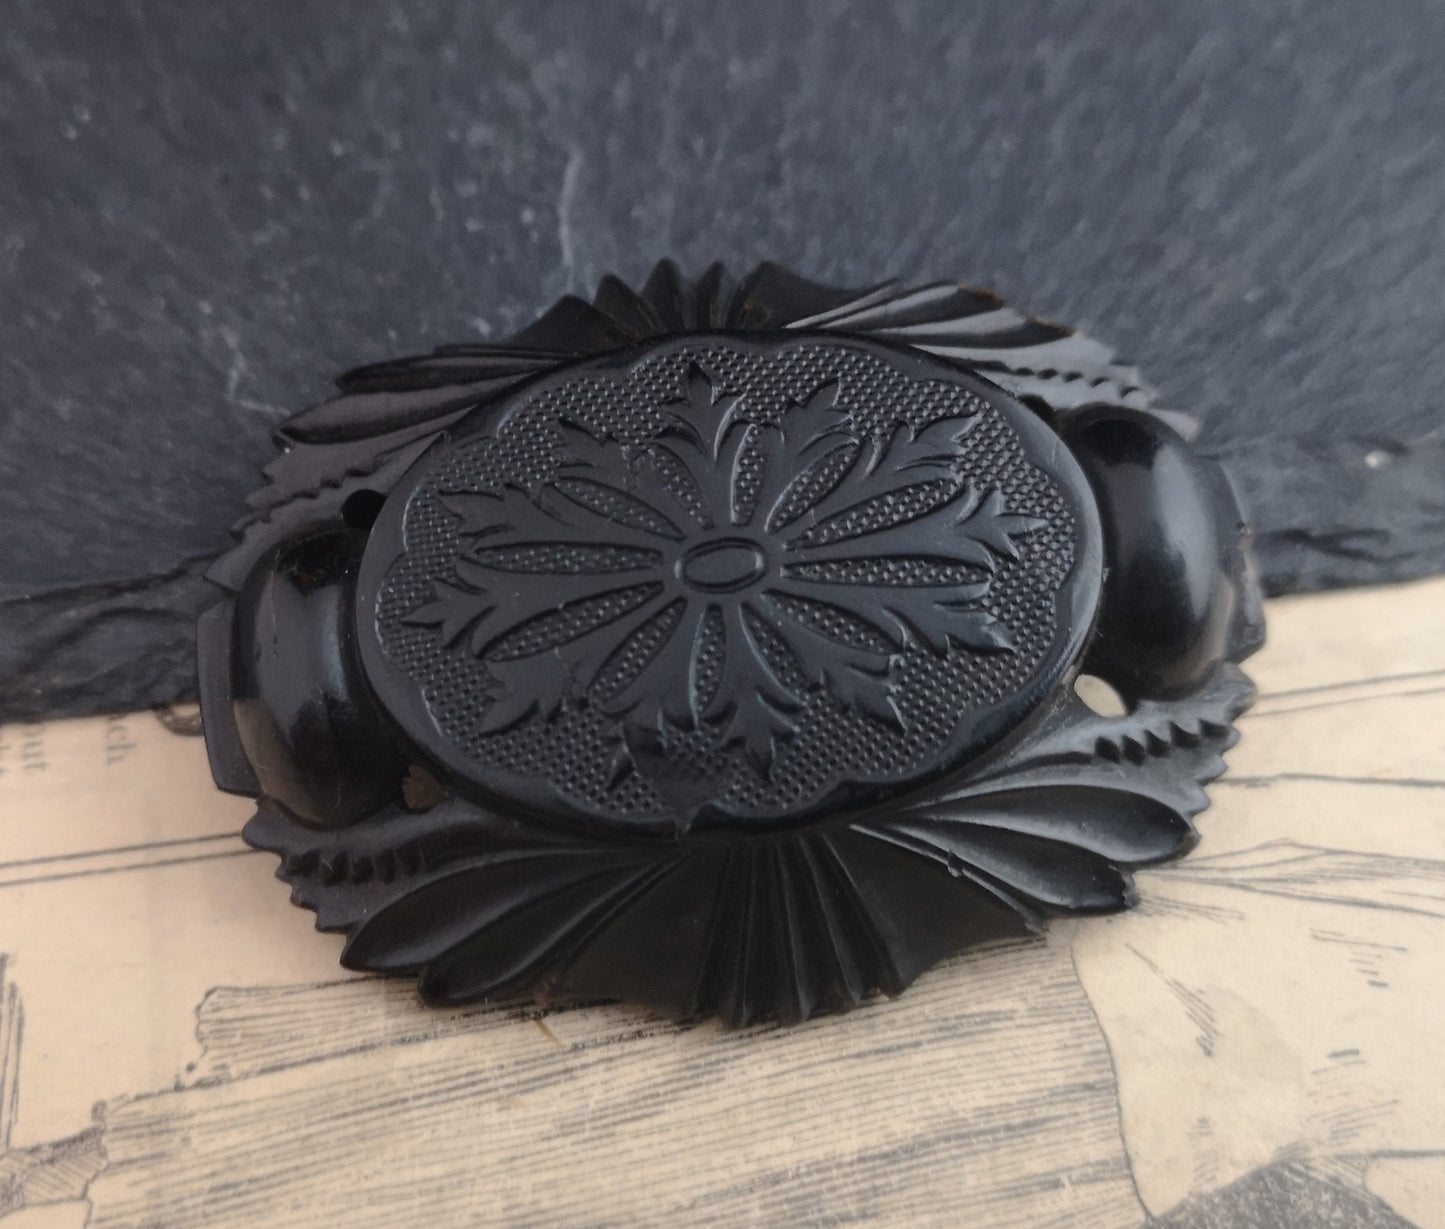 Antique Victorian whitby jet brooch